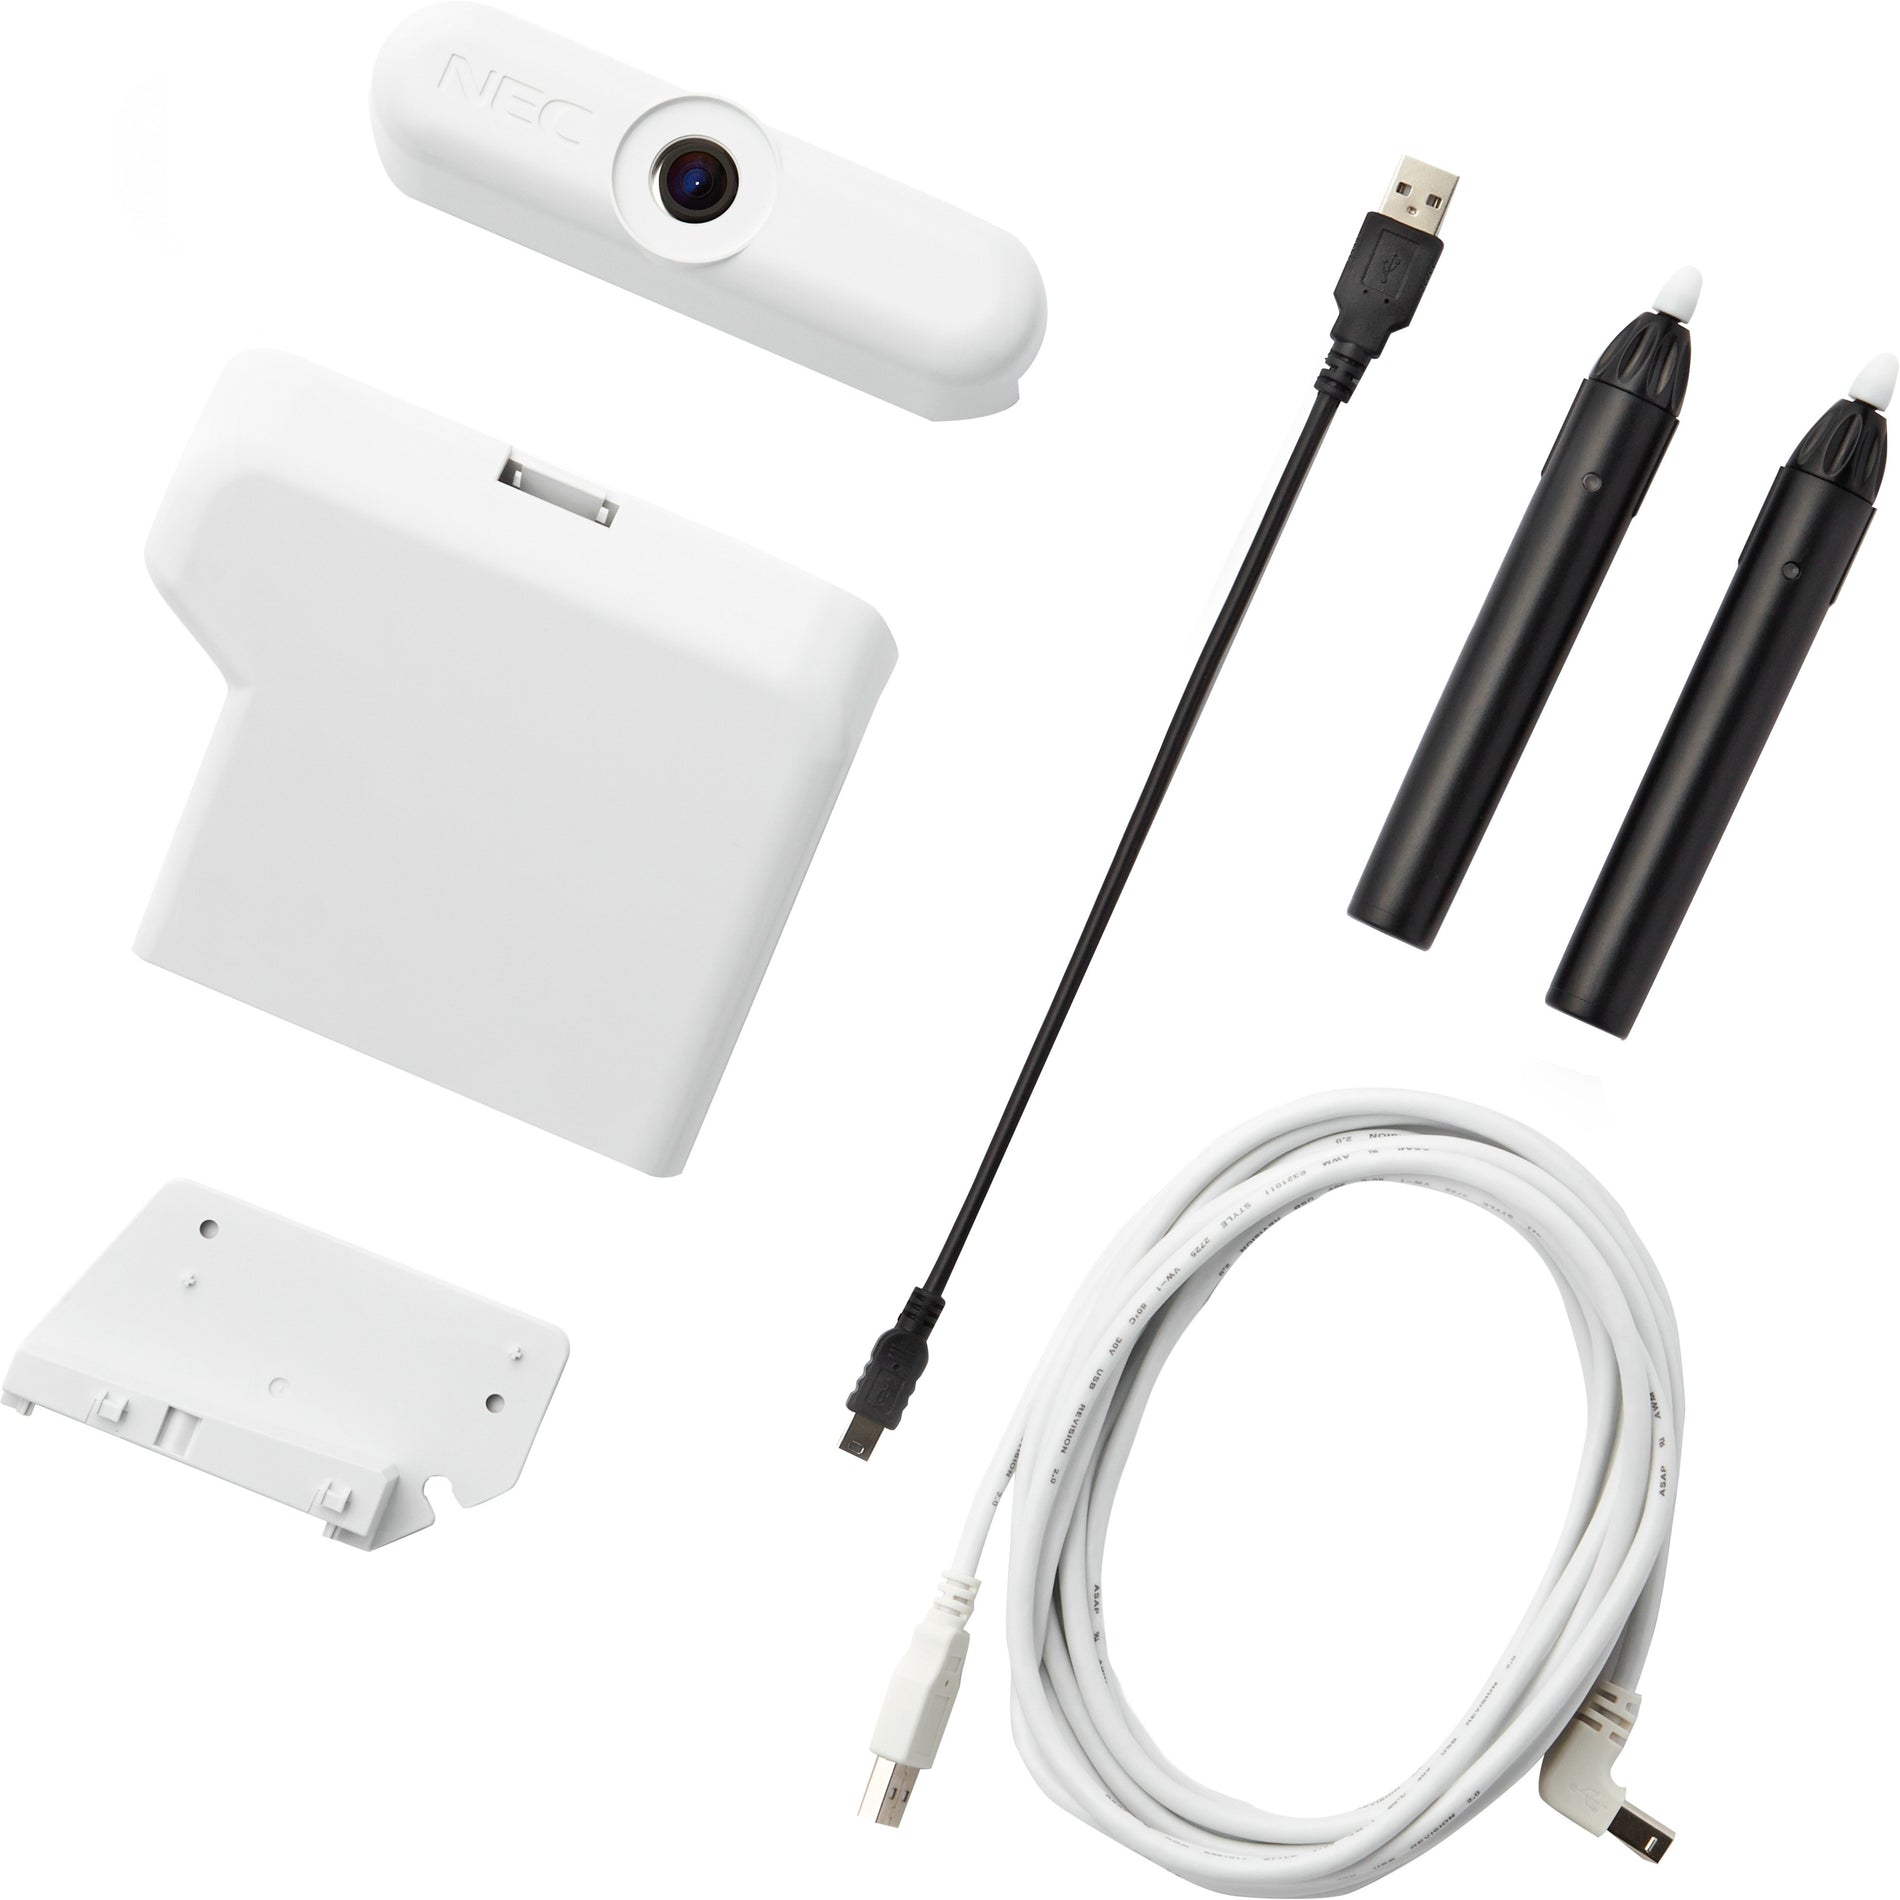 NEC Display NP04WI Projector Accessory Kit, USB Cable, Stylus Pen, Installation Manual, Calibration Software